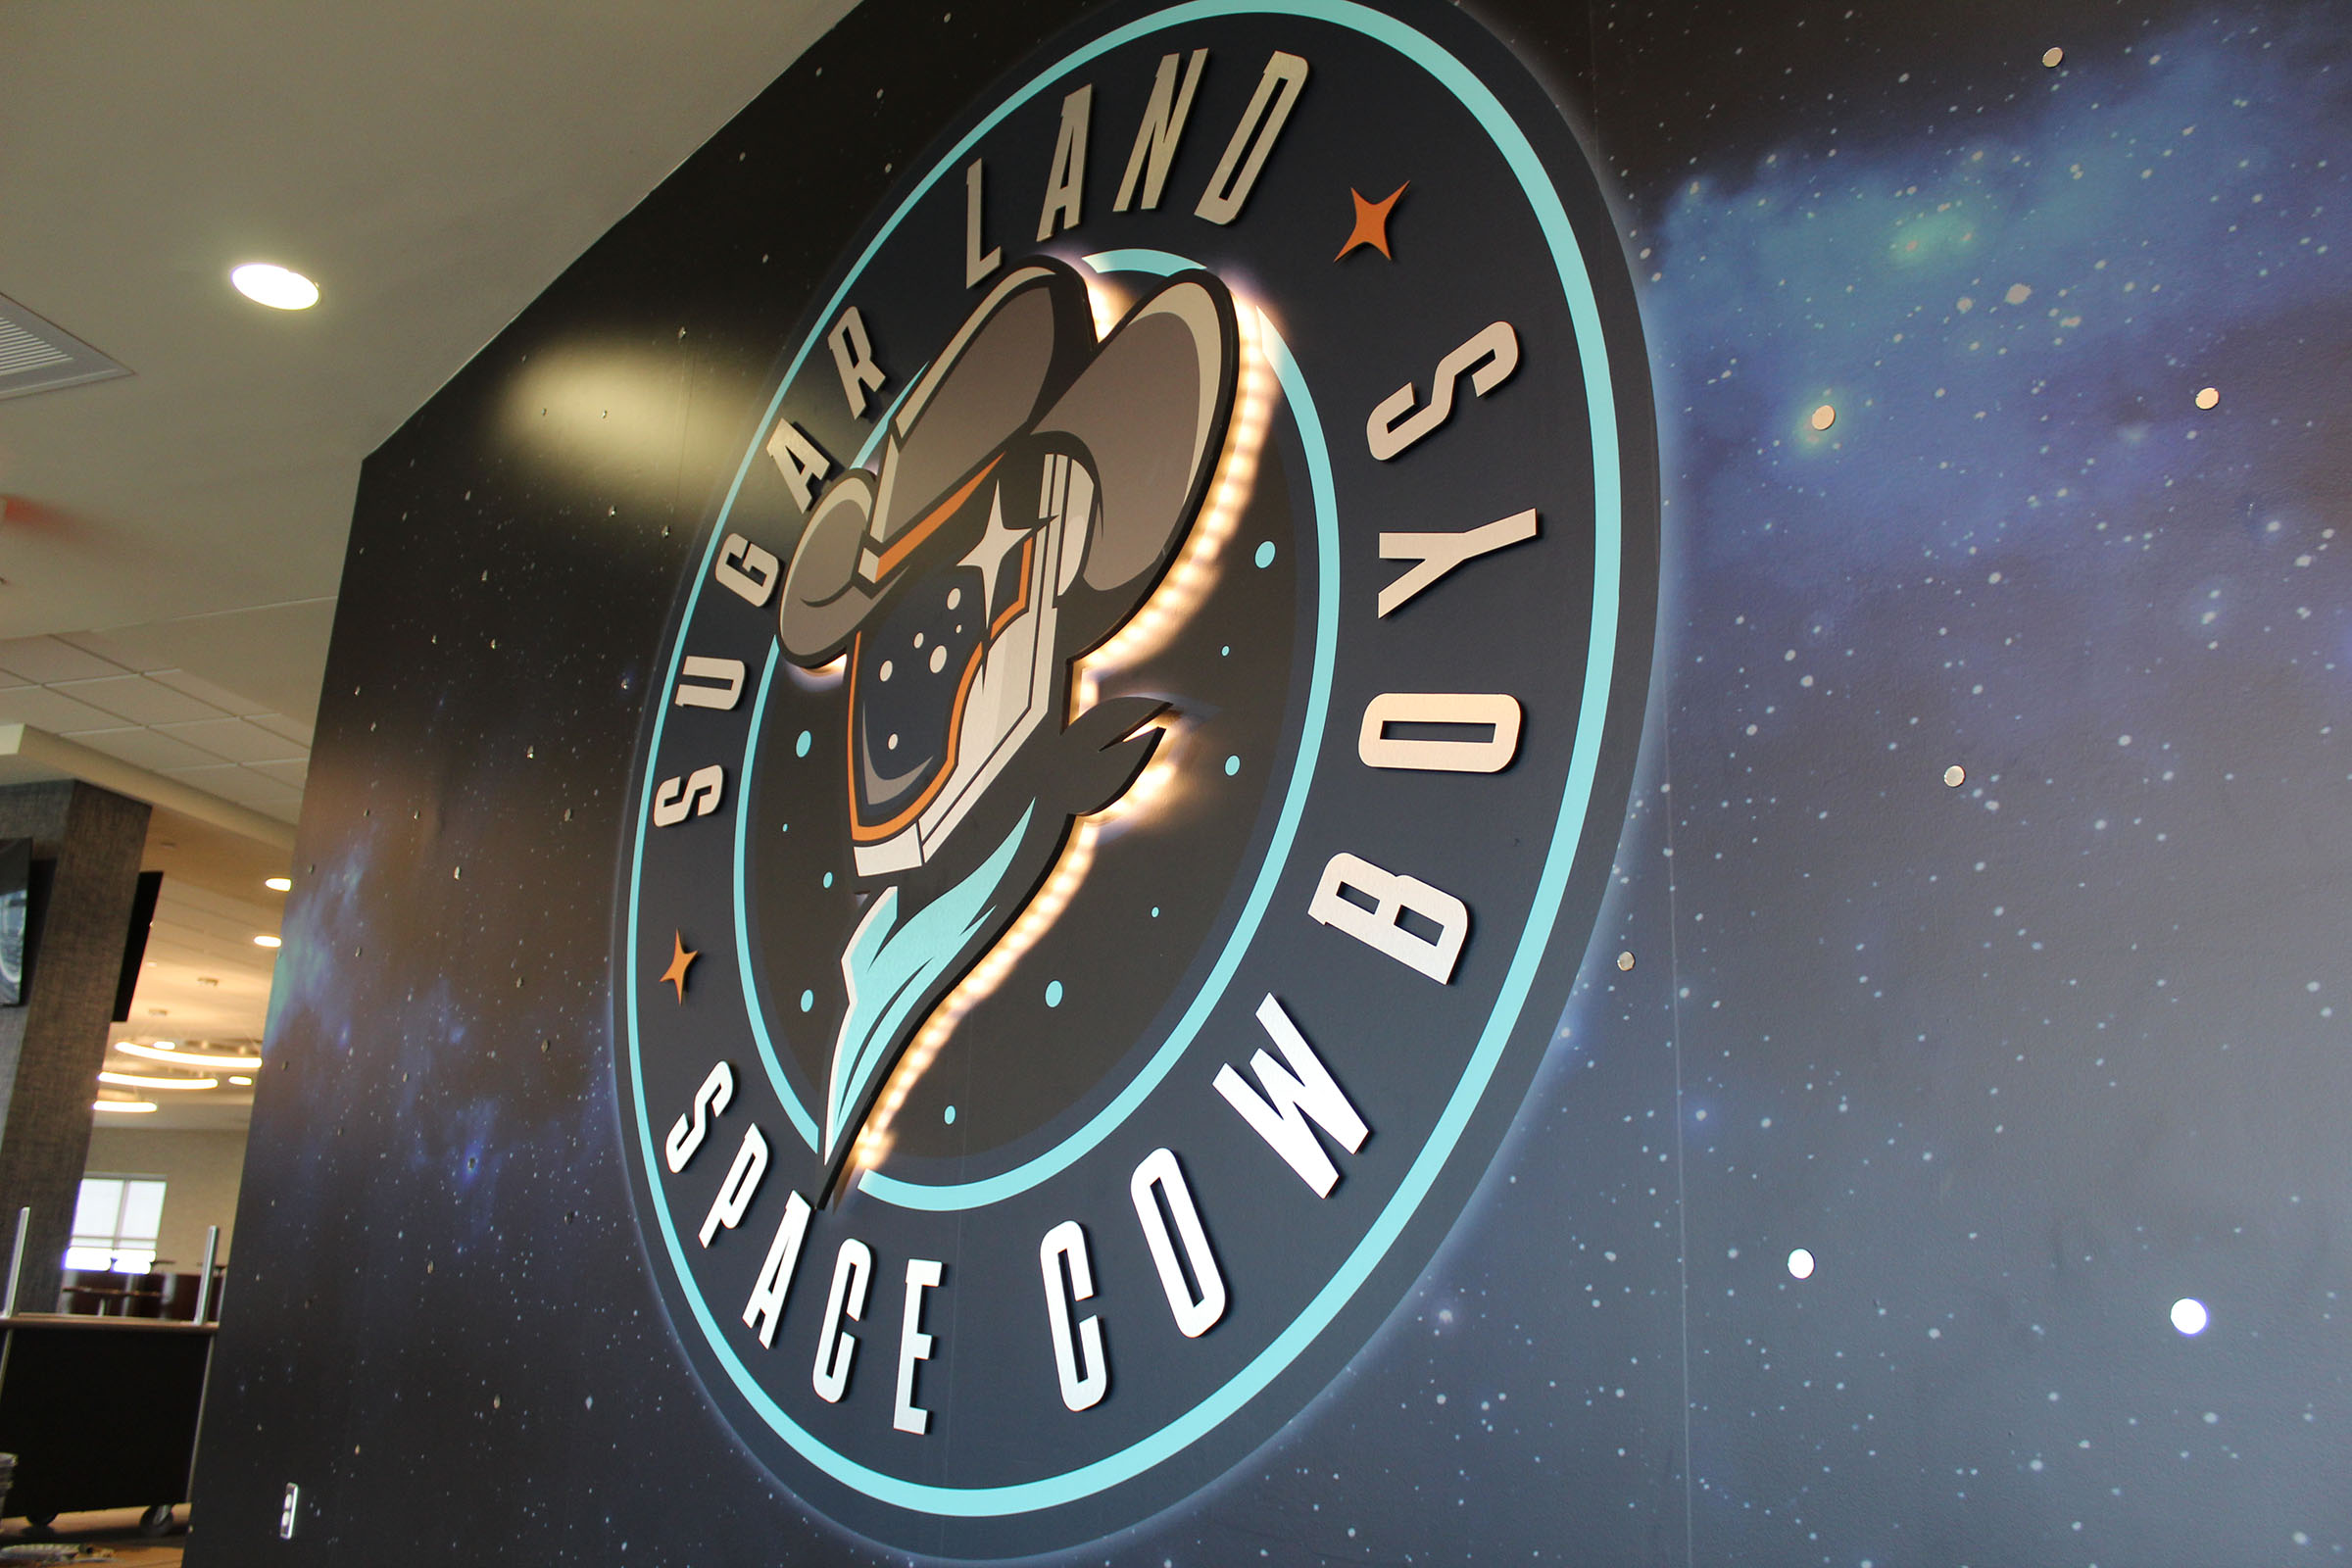 A picture of a large logo on a wall decorated with a space and stars image reading "Sugar Land Space Cowboys"